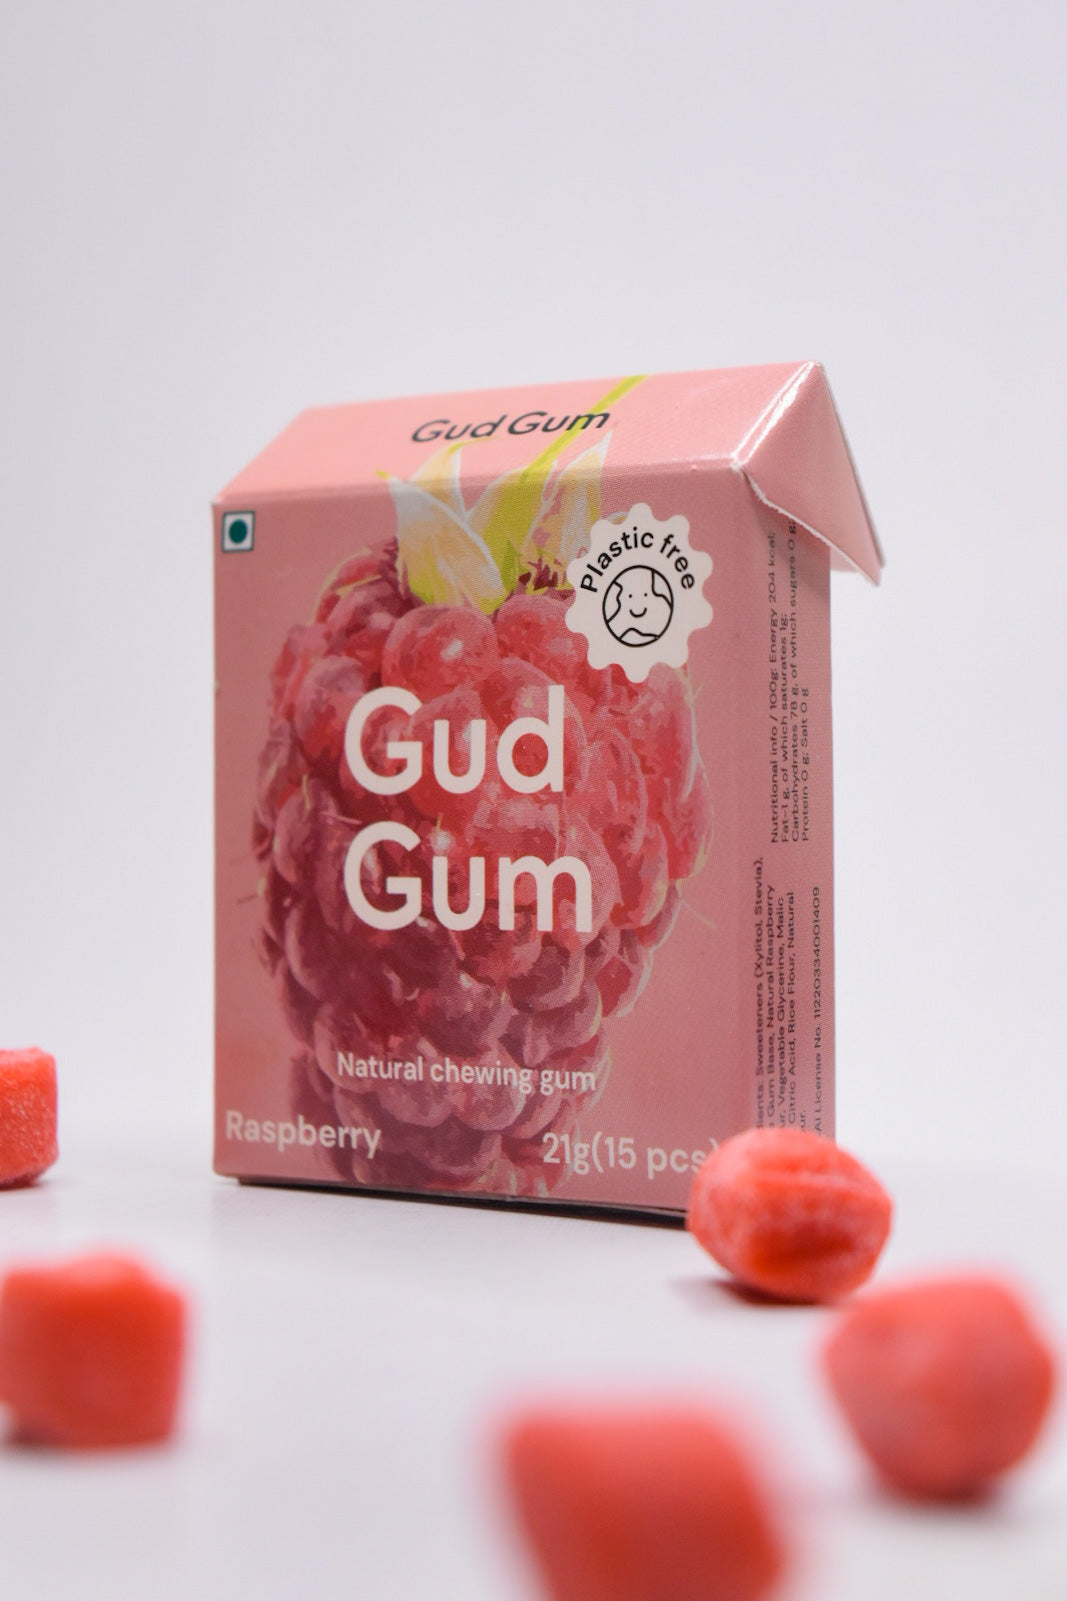 Raspberry Gud Gum- Natural, Plastic Free Chewing Gum- Pack of 4- No added artificial colours, flavours & sweeteners - 21g x 4 (Raspberry)